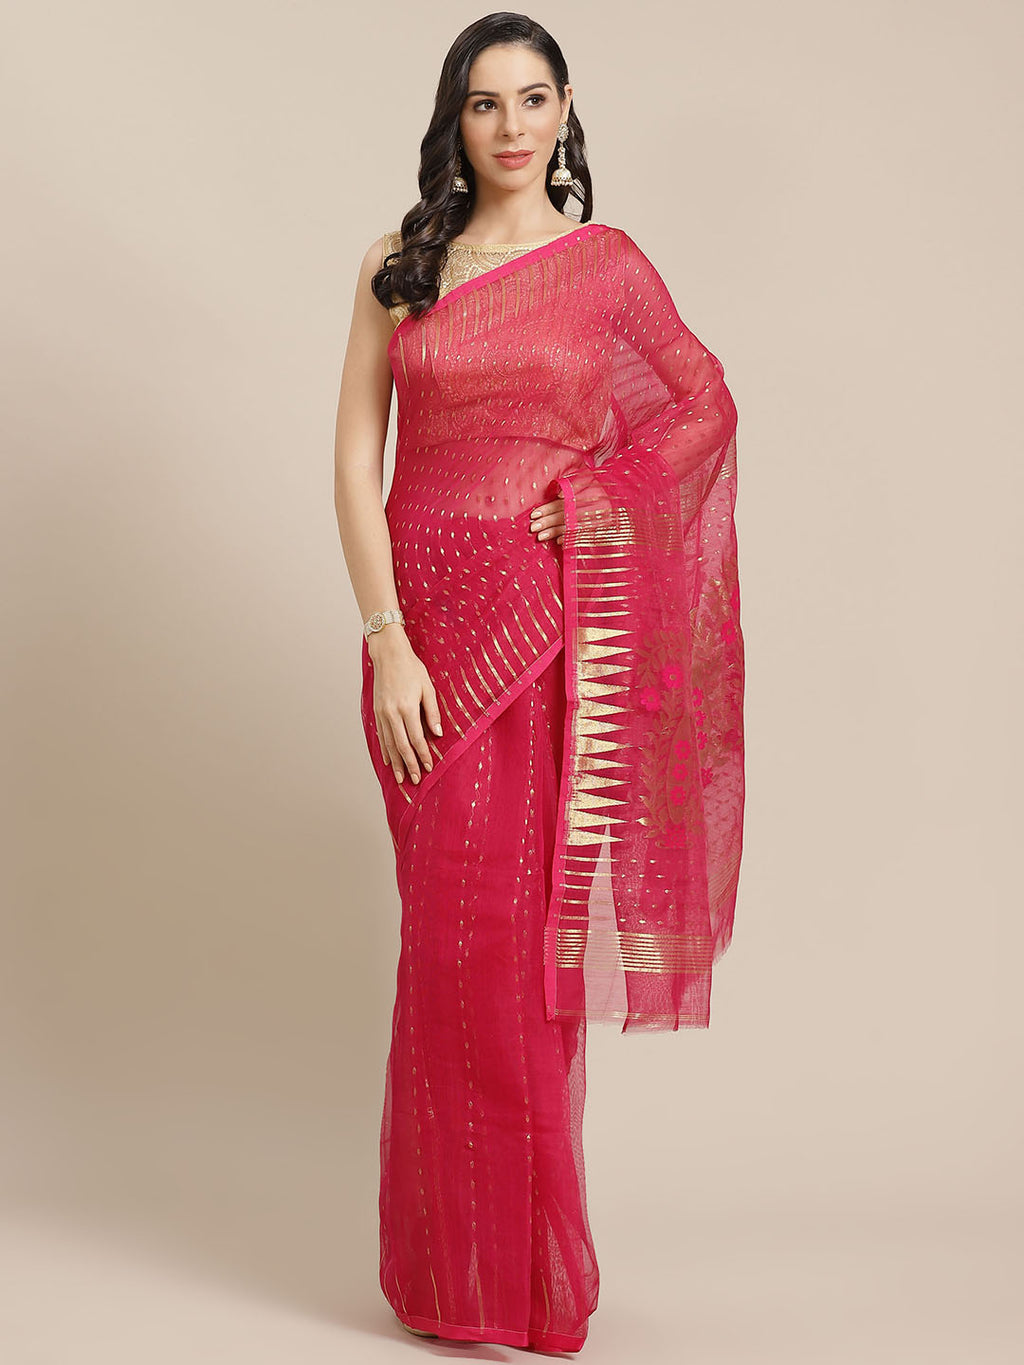 Pink and Tan, Kalakari India Jamdani Silk Cotton Woven Design Saree without blouse CHBHSA0029-Saree-Kalakari India-CHBHSA0029-Bengal, Geographical Indication, Hand Crafted, Hand Painted, Heritage Prints, Jamdani, Natural Dyes, Red, Sarees, Silk Blended, Sustainable Fabrics, Woven, Yellow-[Linen,Ethnic,wear,Fashionista,Handloom,Handicraft,Indigo,blockprint,block,print,Cotton,Chanderi,Blue, latest,classy,party,bollywood,trendy,summer,style,traditional,formal,elegant,unique,style,hand,block,print, 